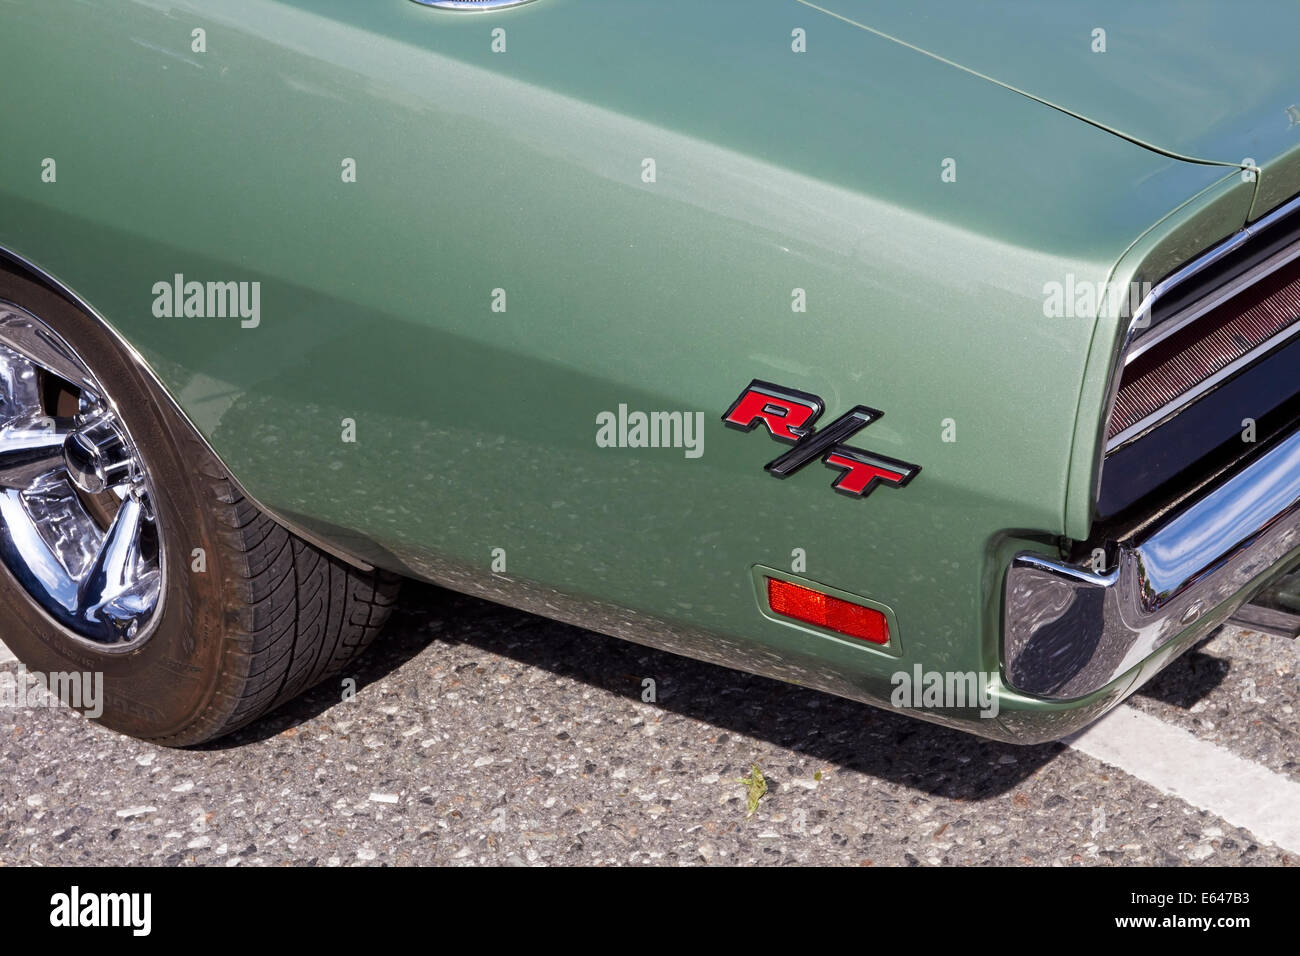 1970s Dodge Charger R/T rear detail Stock Photo